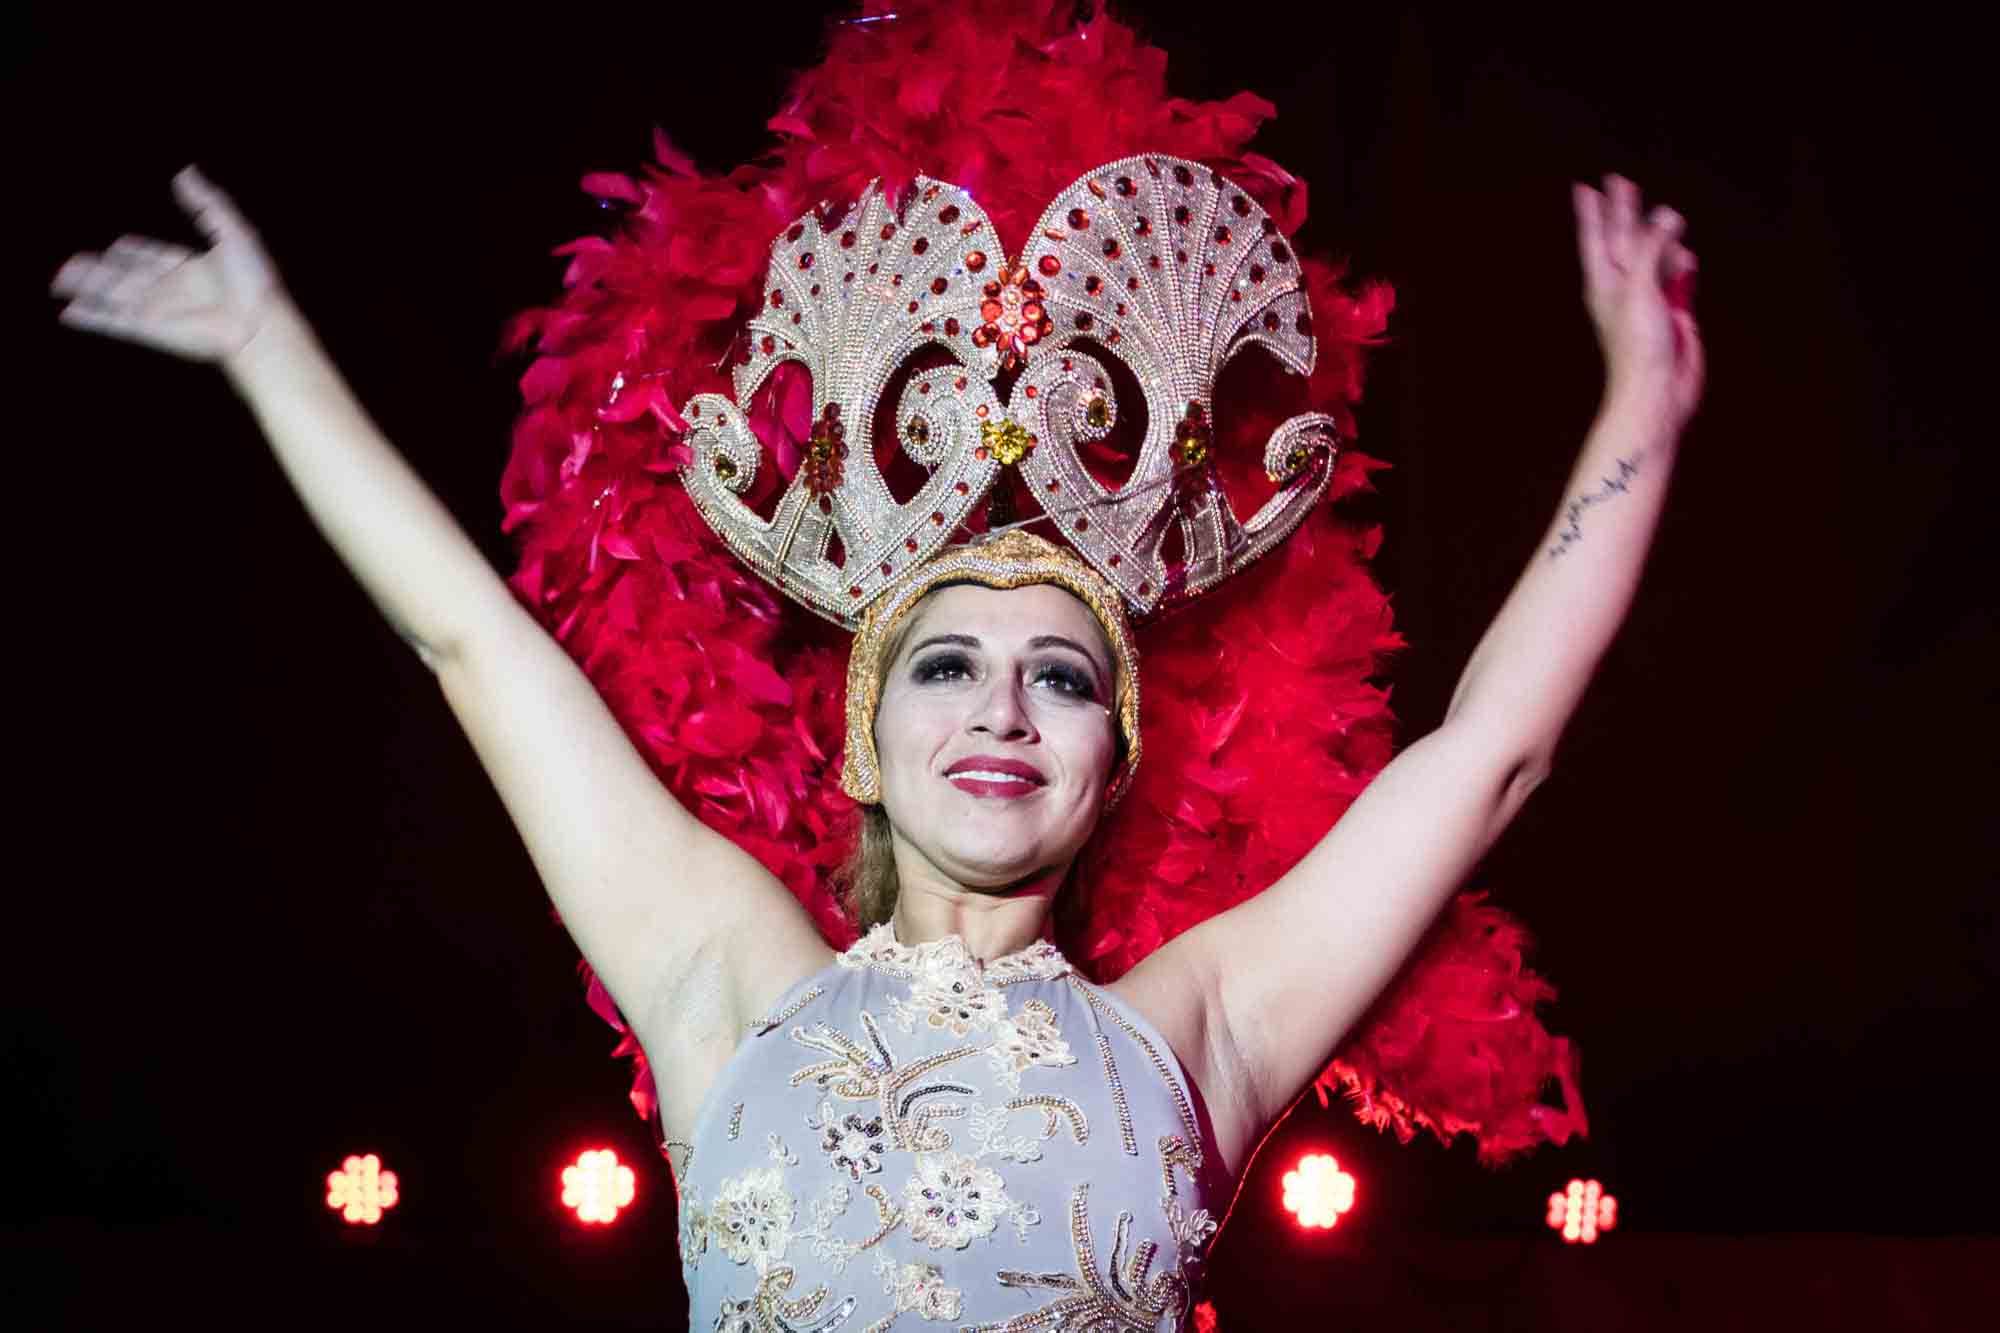 A showgirl wearing a red feather headdress in the Forever Circle performing in Valladolid